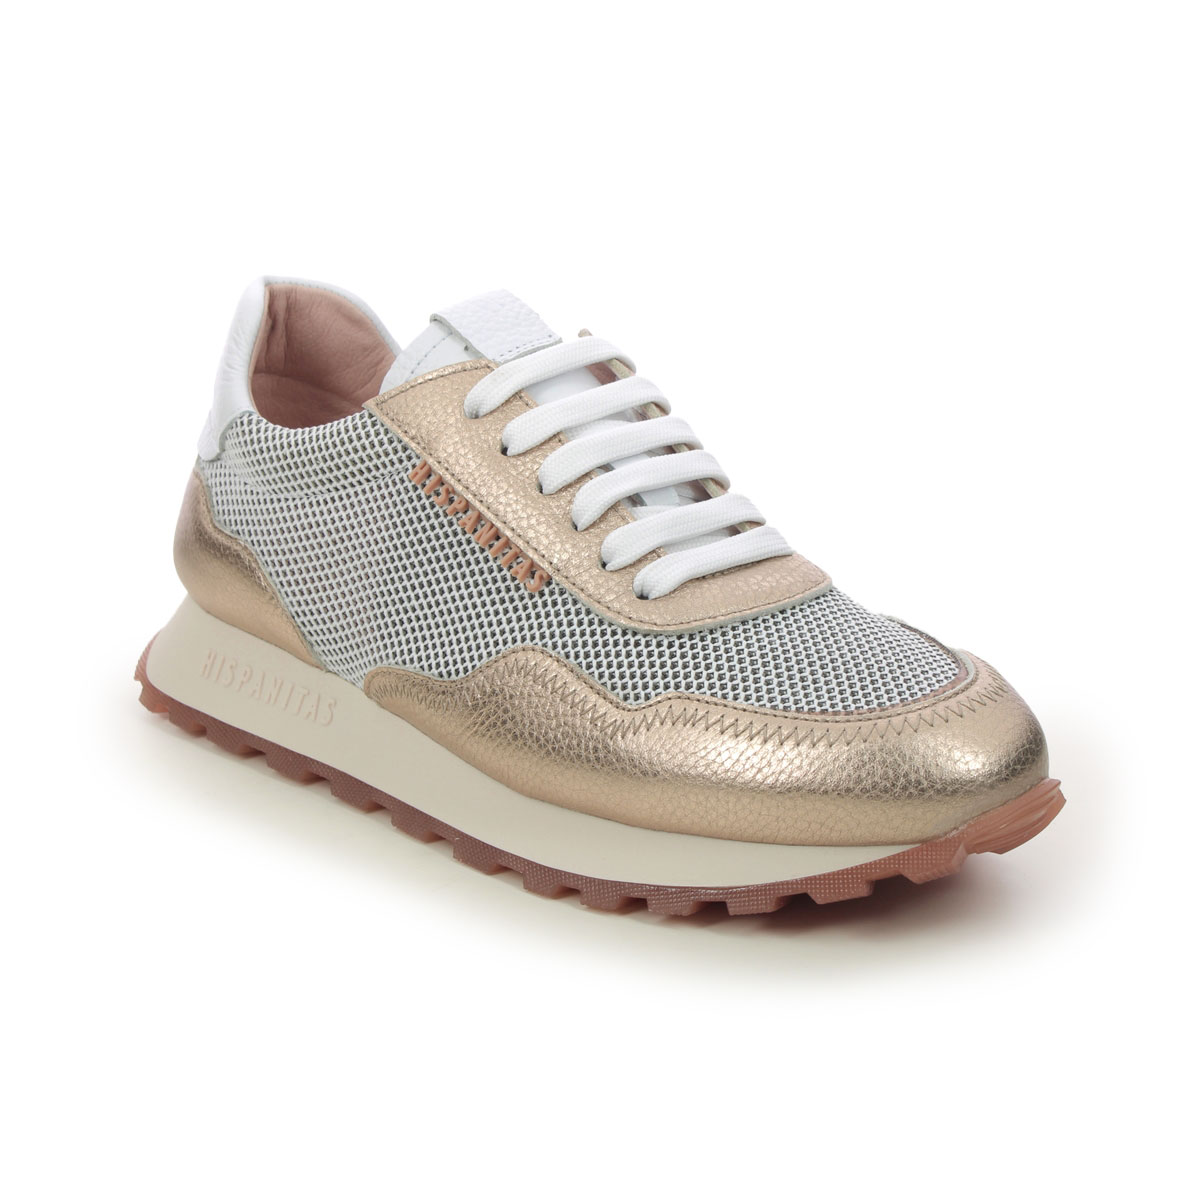 Hispanitas Loira Perf Gold Womens trainers HV243231-006 in a Plain Leather and Textile in Size 38